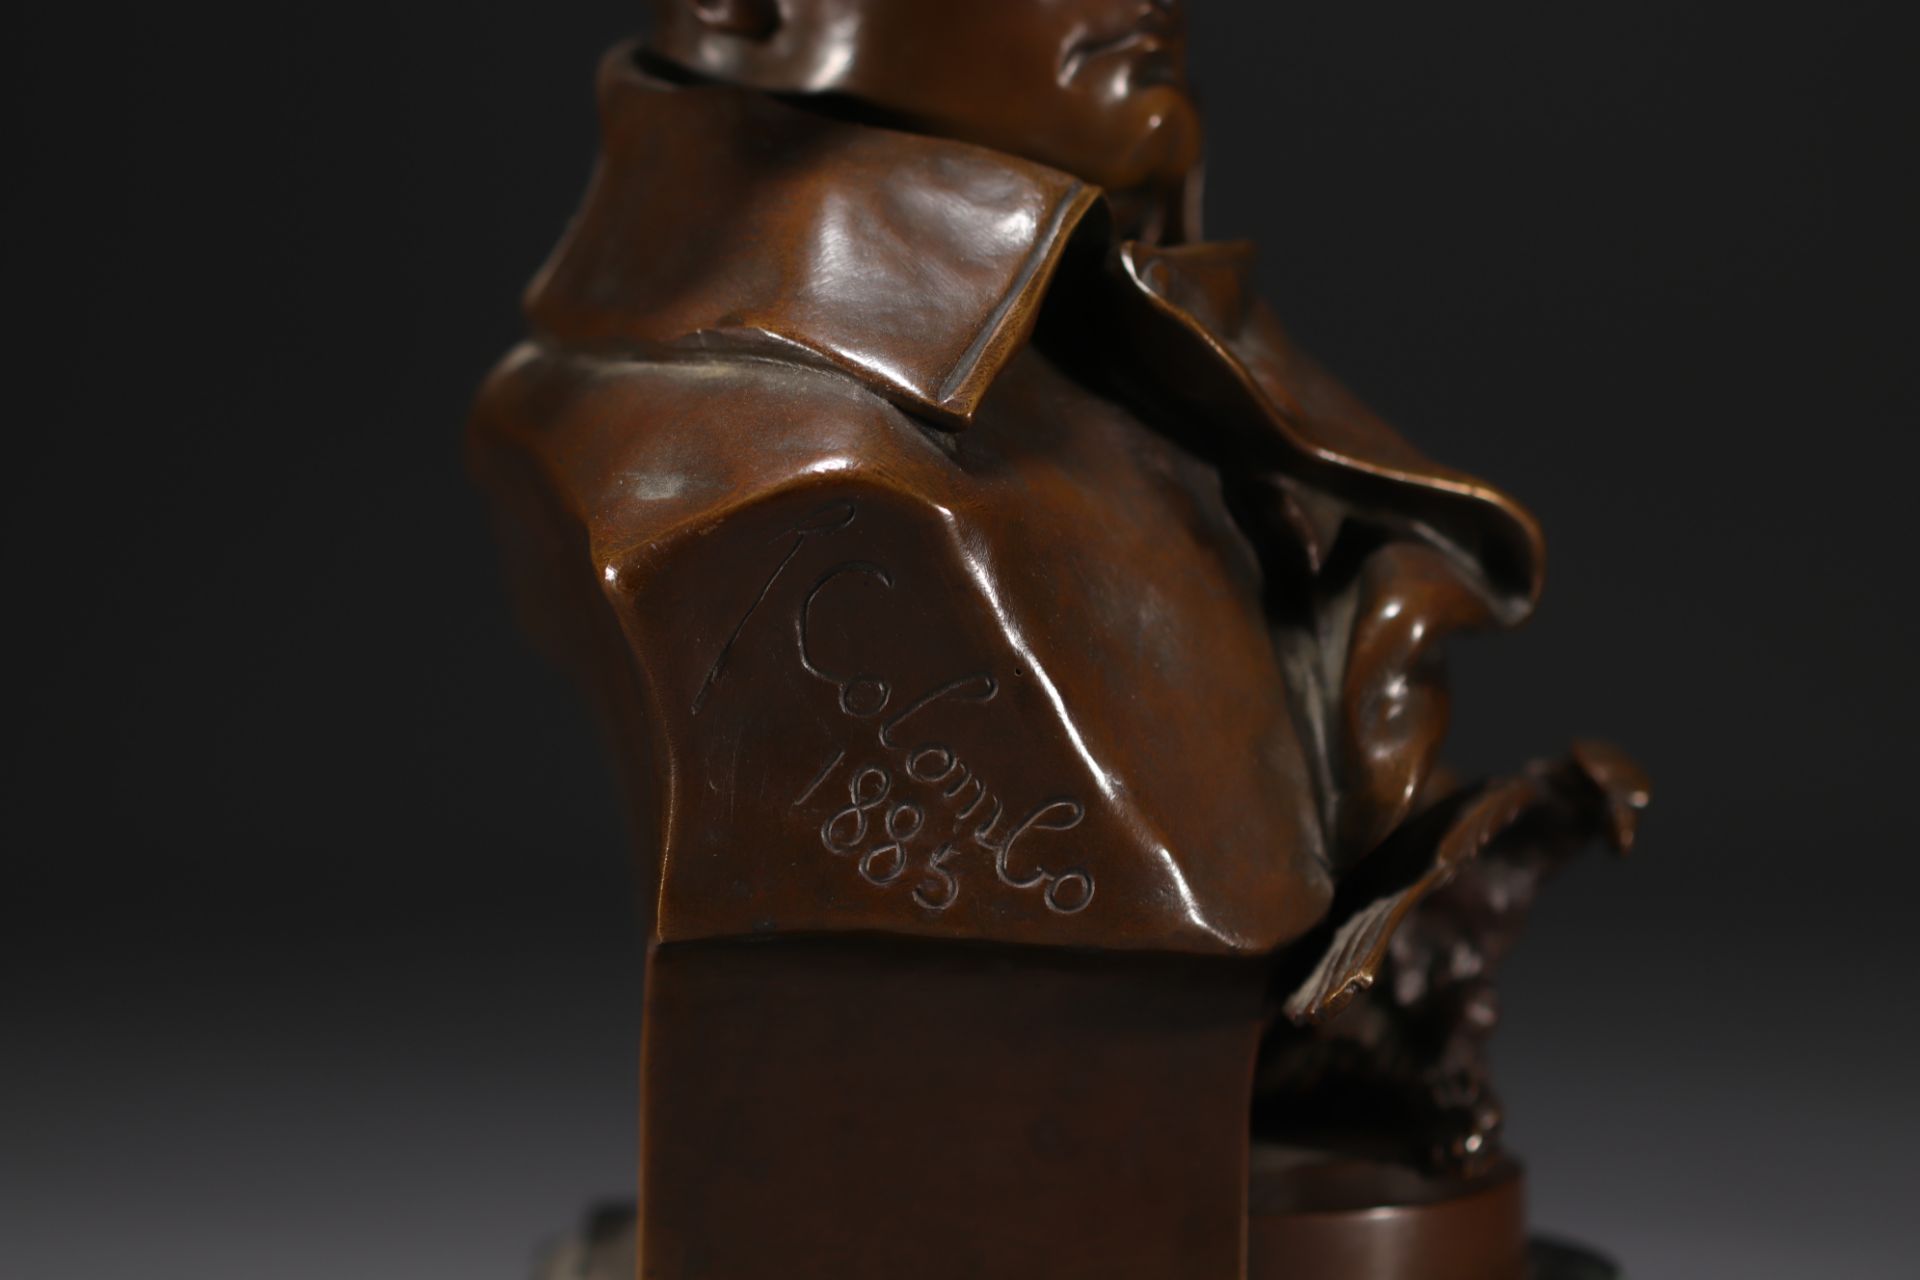 Renzo COLOMBO (1856-1885) Bust of Napoleon 1st in bronze with shaded brown patina, 1885. - Image 5 of 5